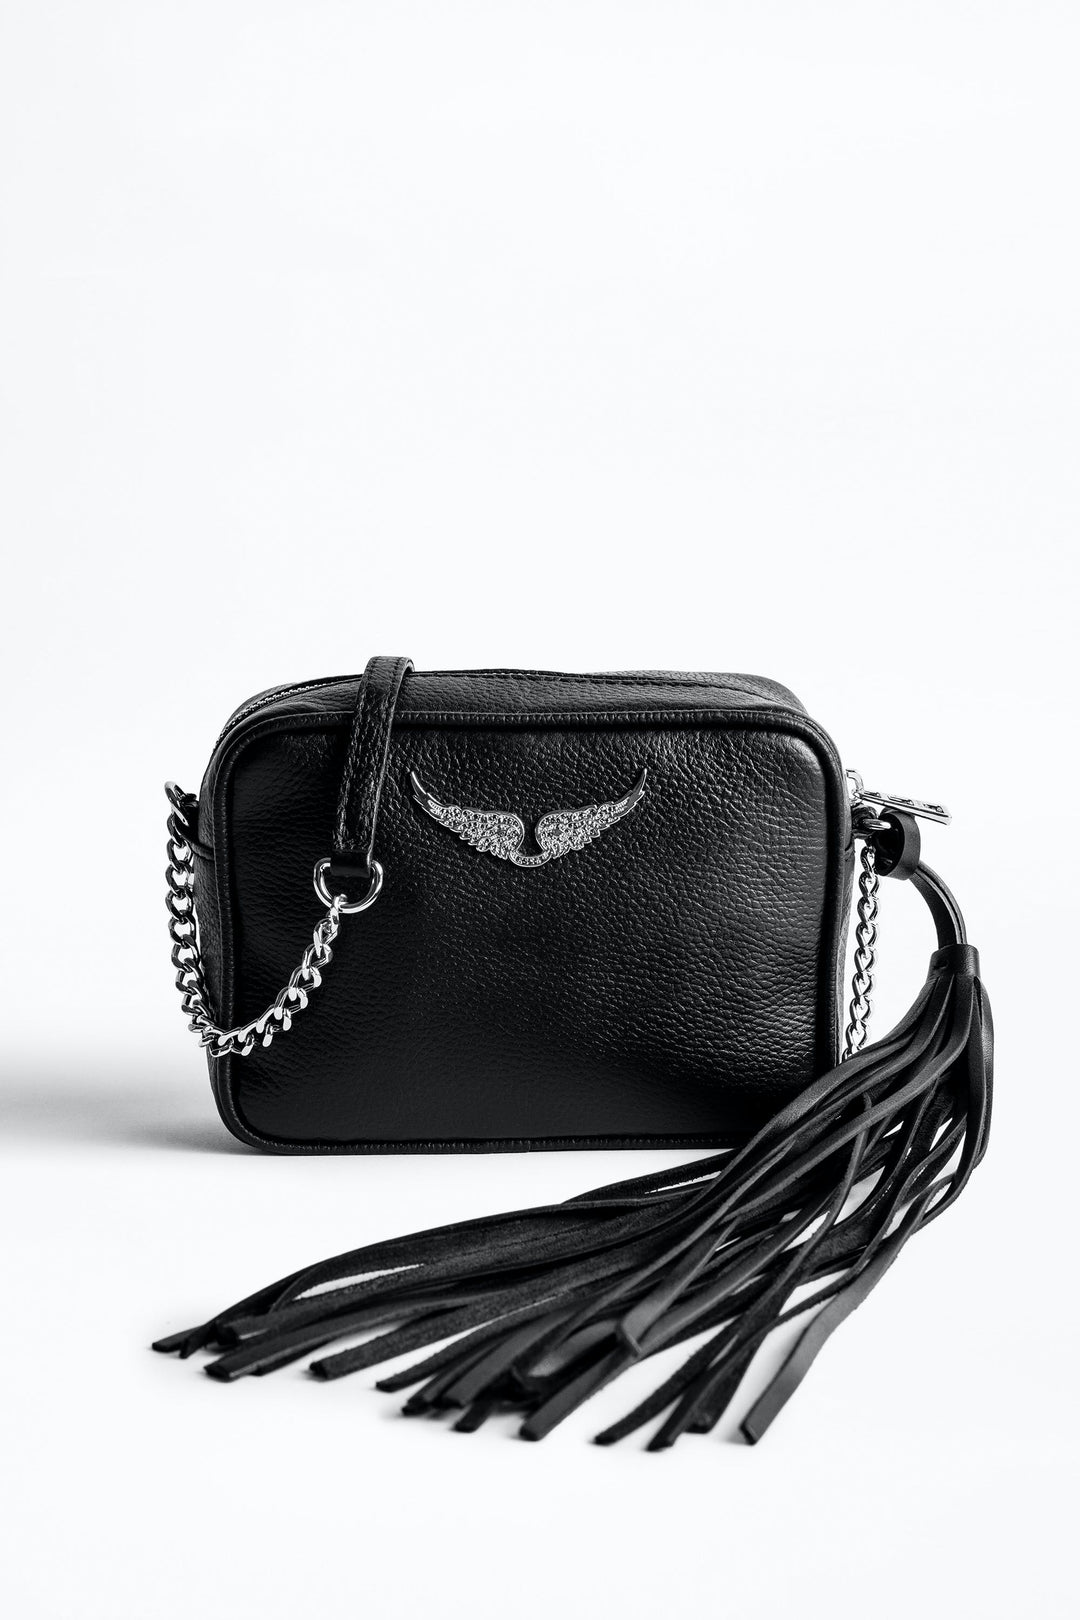 Zadig & Voltaire - XS Boxy Grained Leather Bag